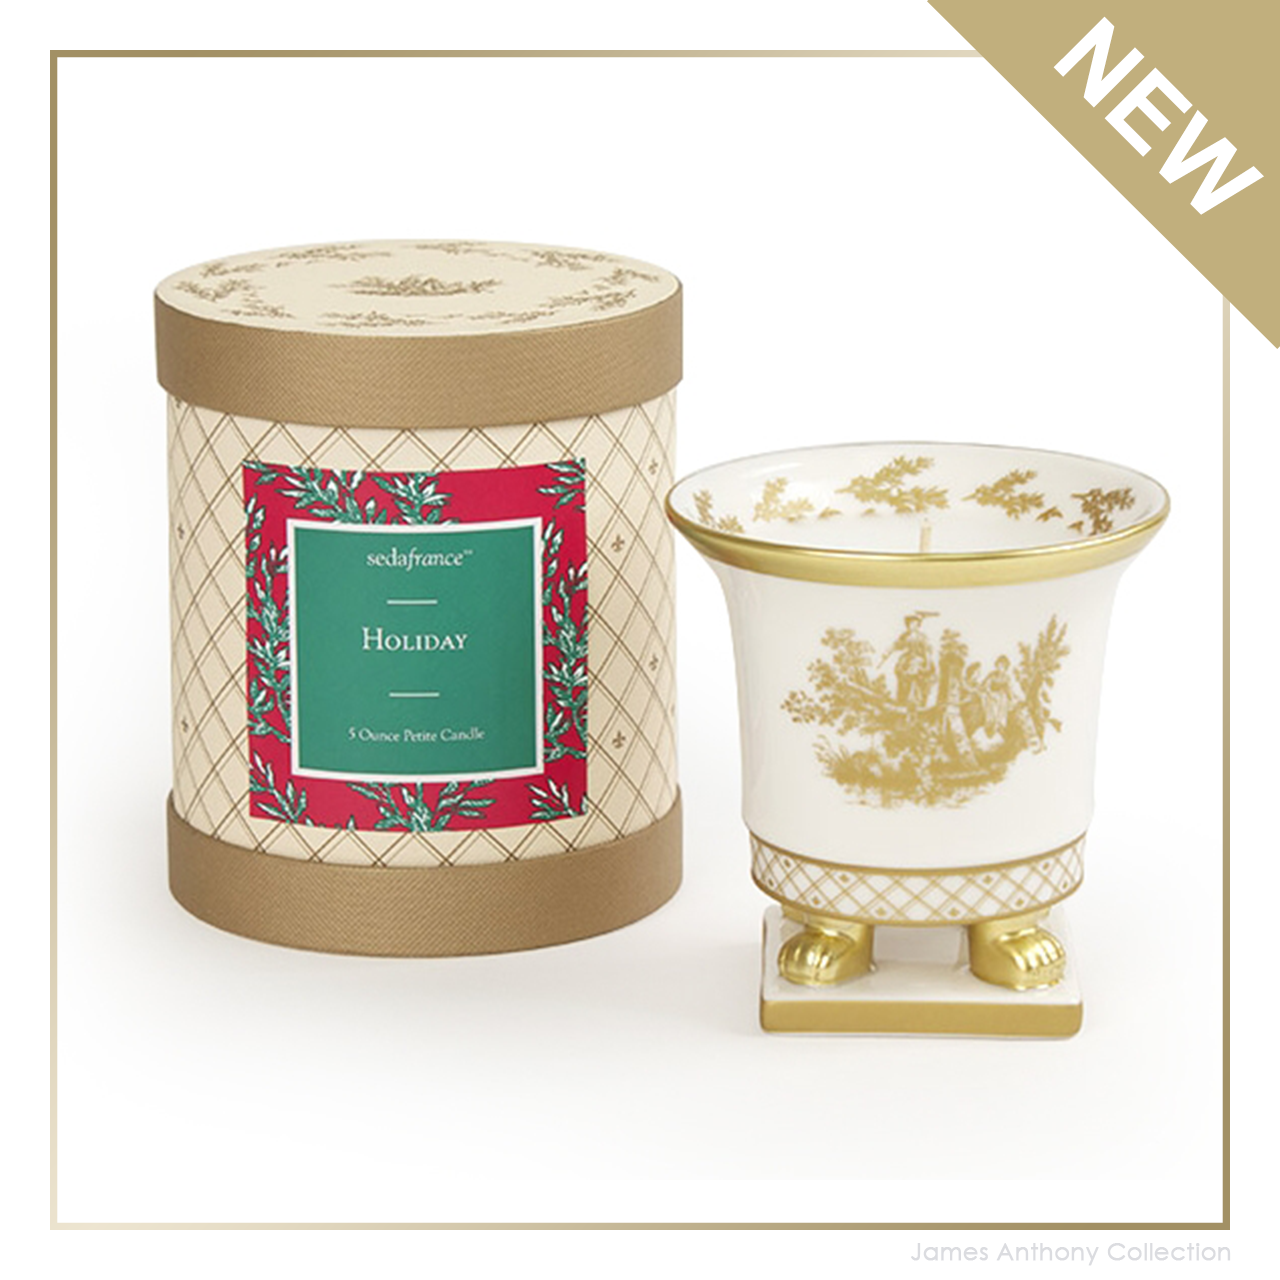 SEDA France Holiday Classic Toile Petite Ceramic Candle | James Anthony  Collection